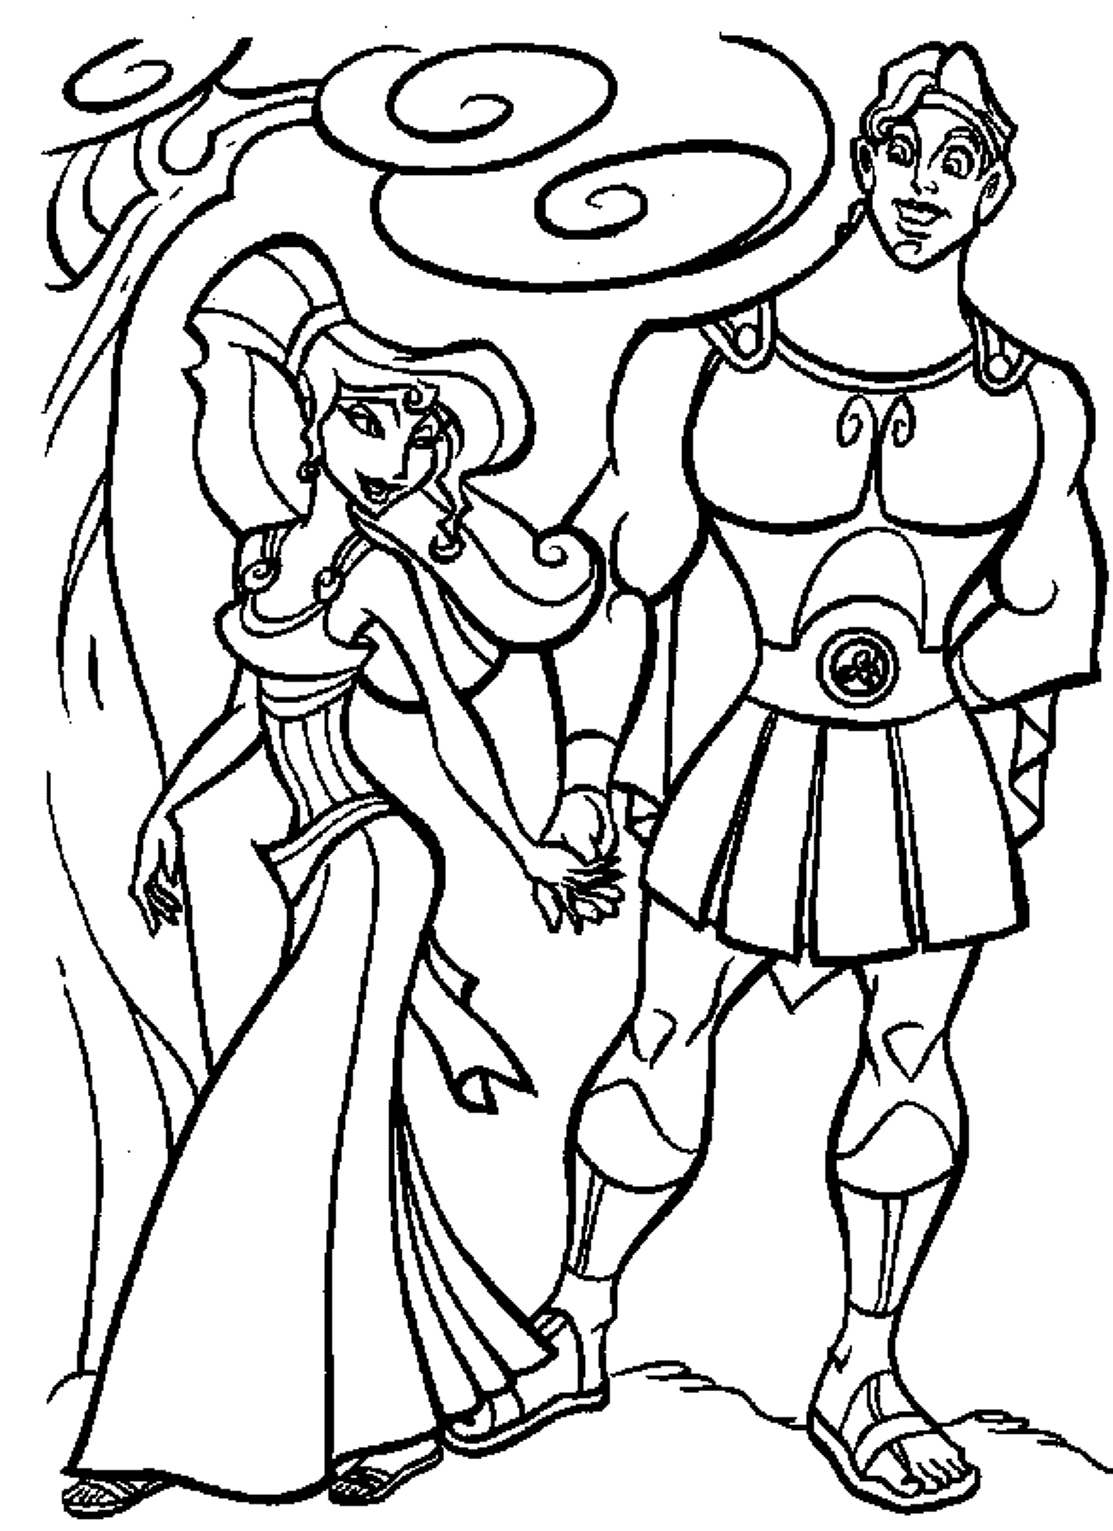 Disney Hercules Cartoon Coloring Pages | Cartoon Coloring pages of ...